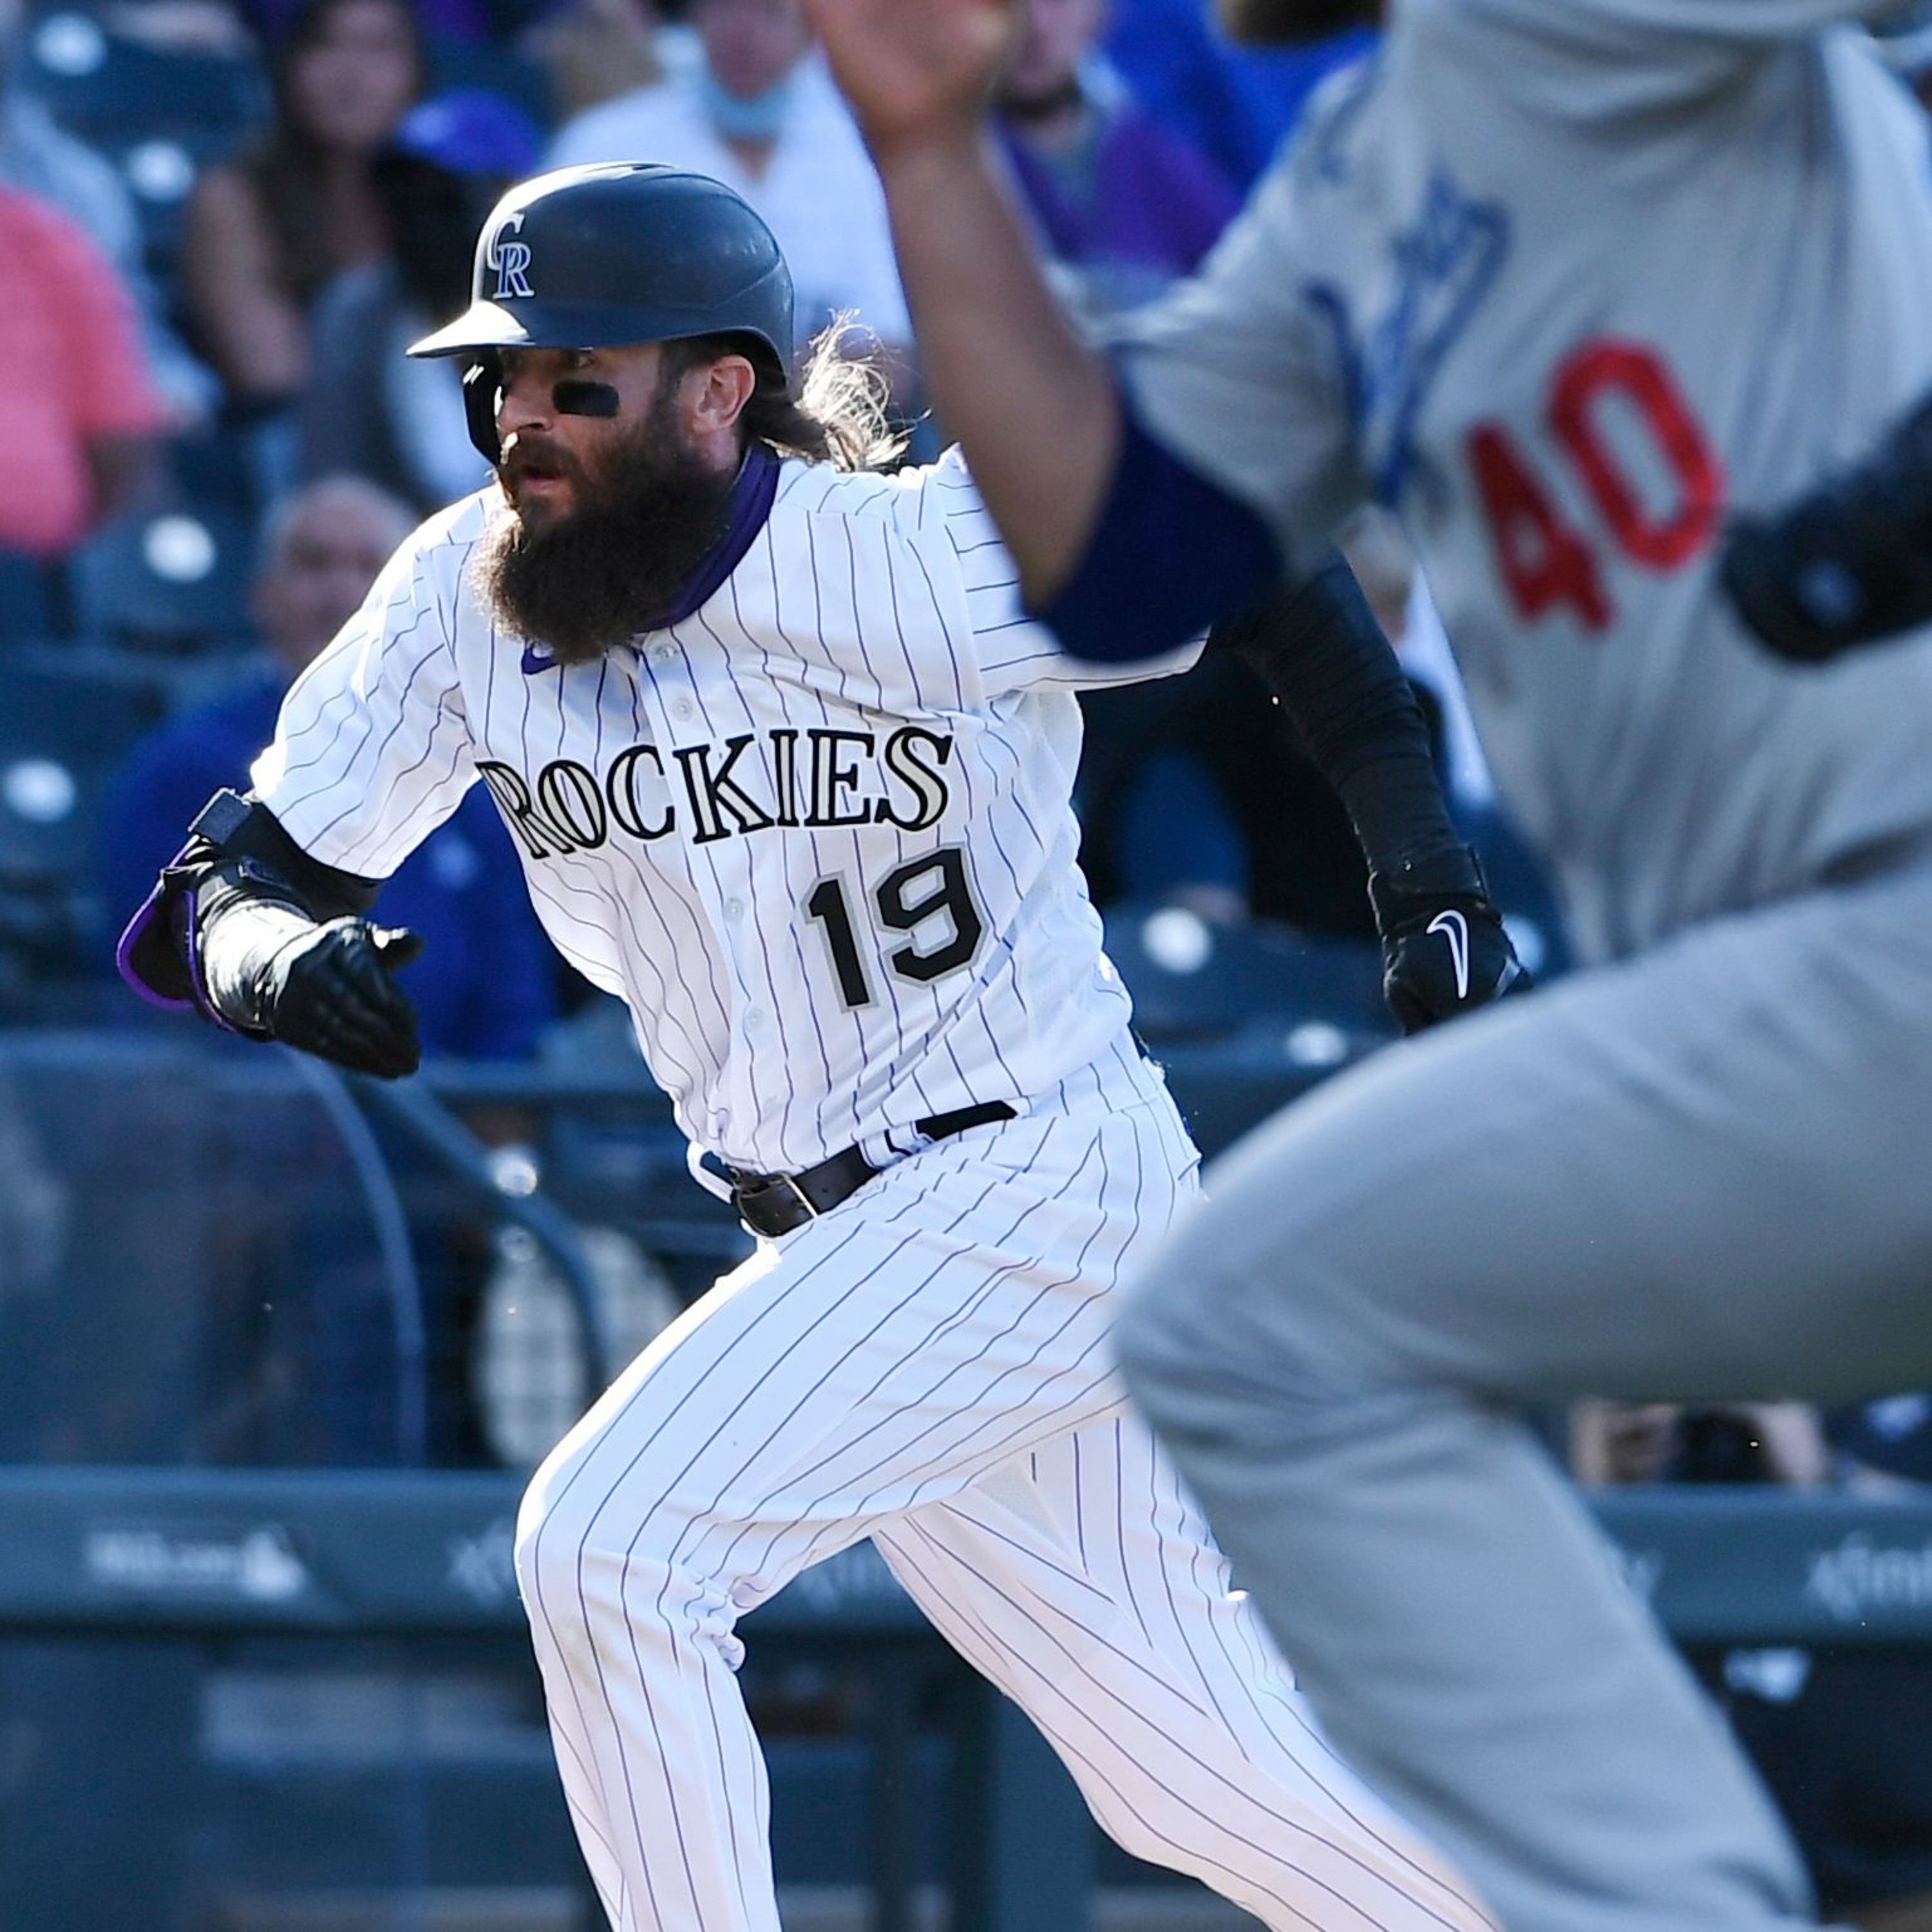 Ep. 169 -- Breaking down Charlie Blackmon's legacy with the Rockies, plus potential deadline trades